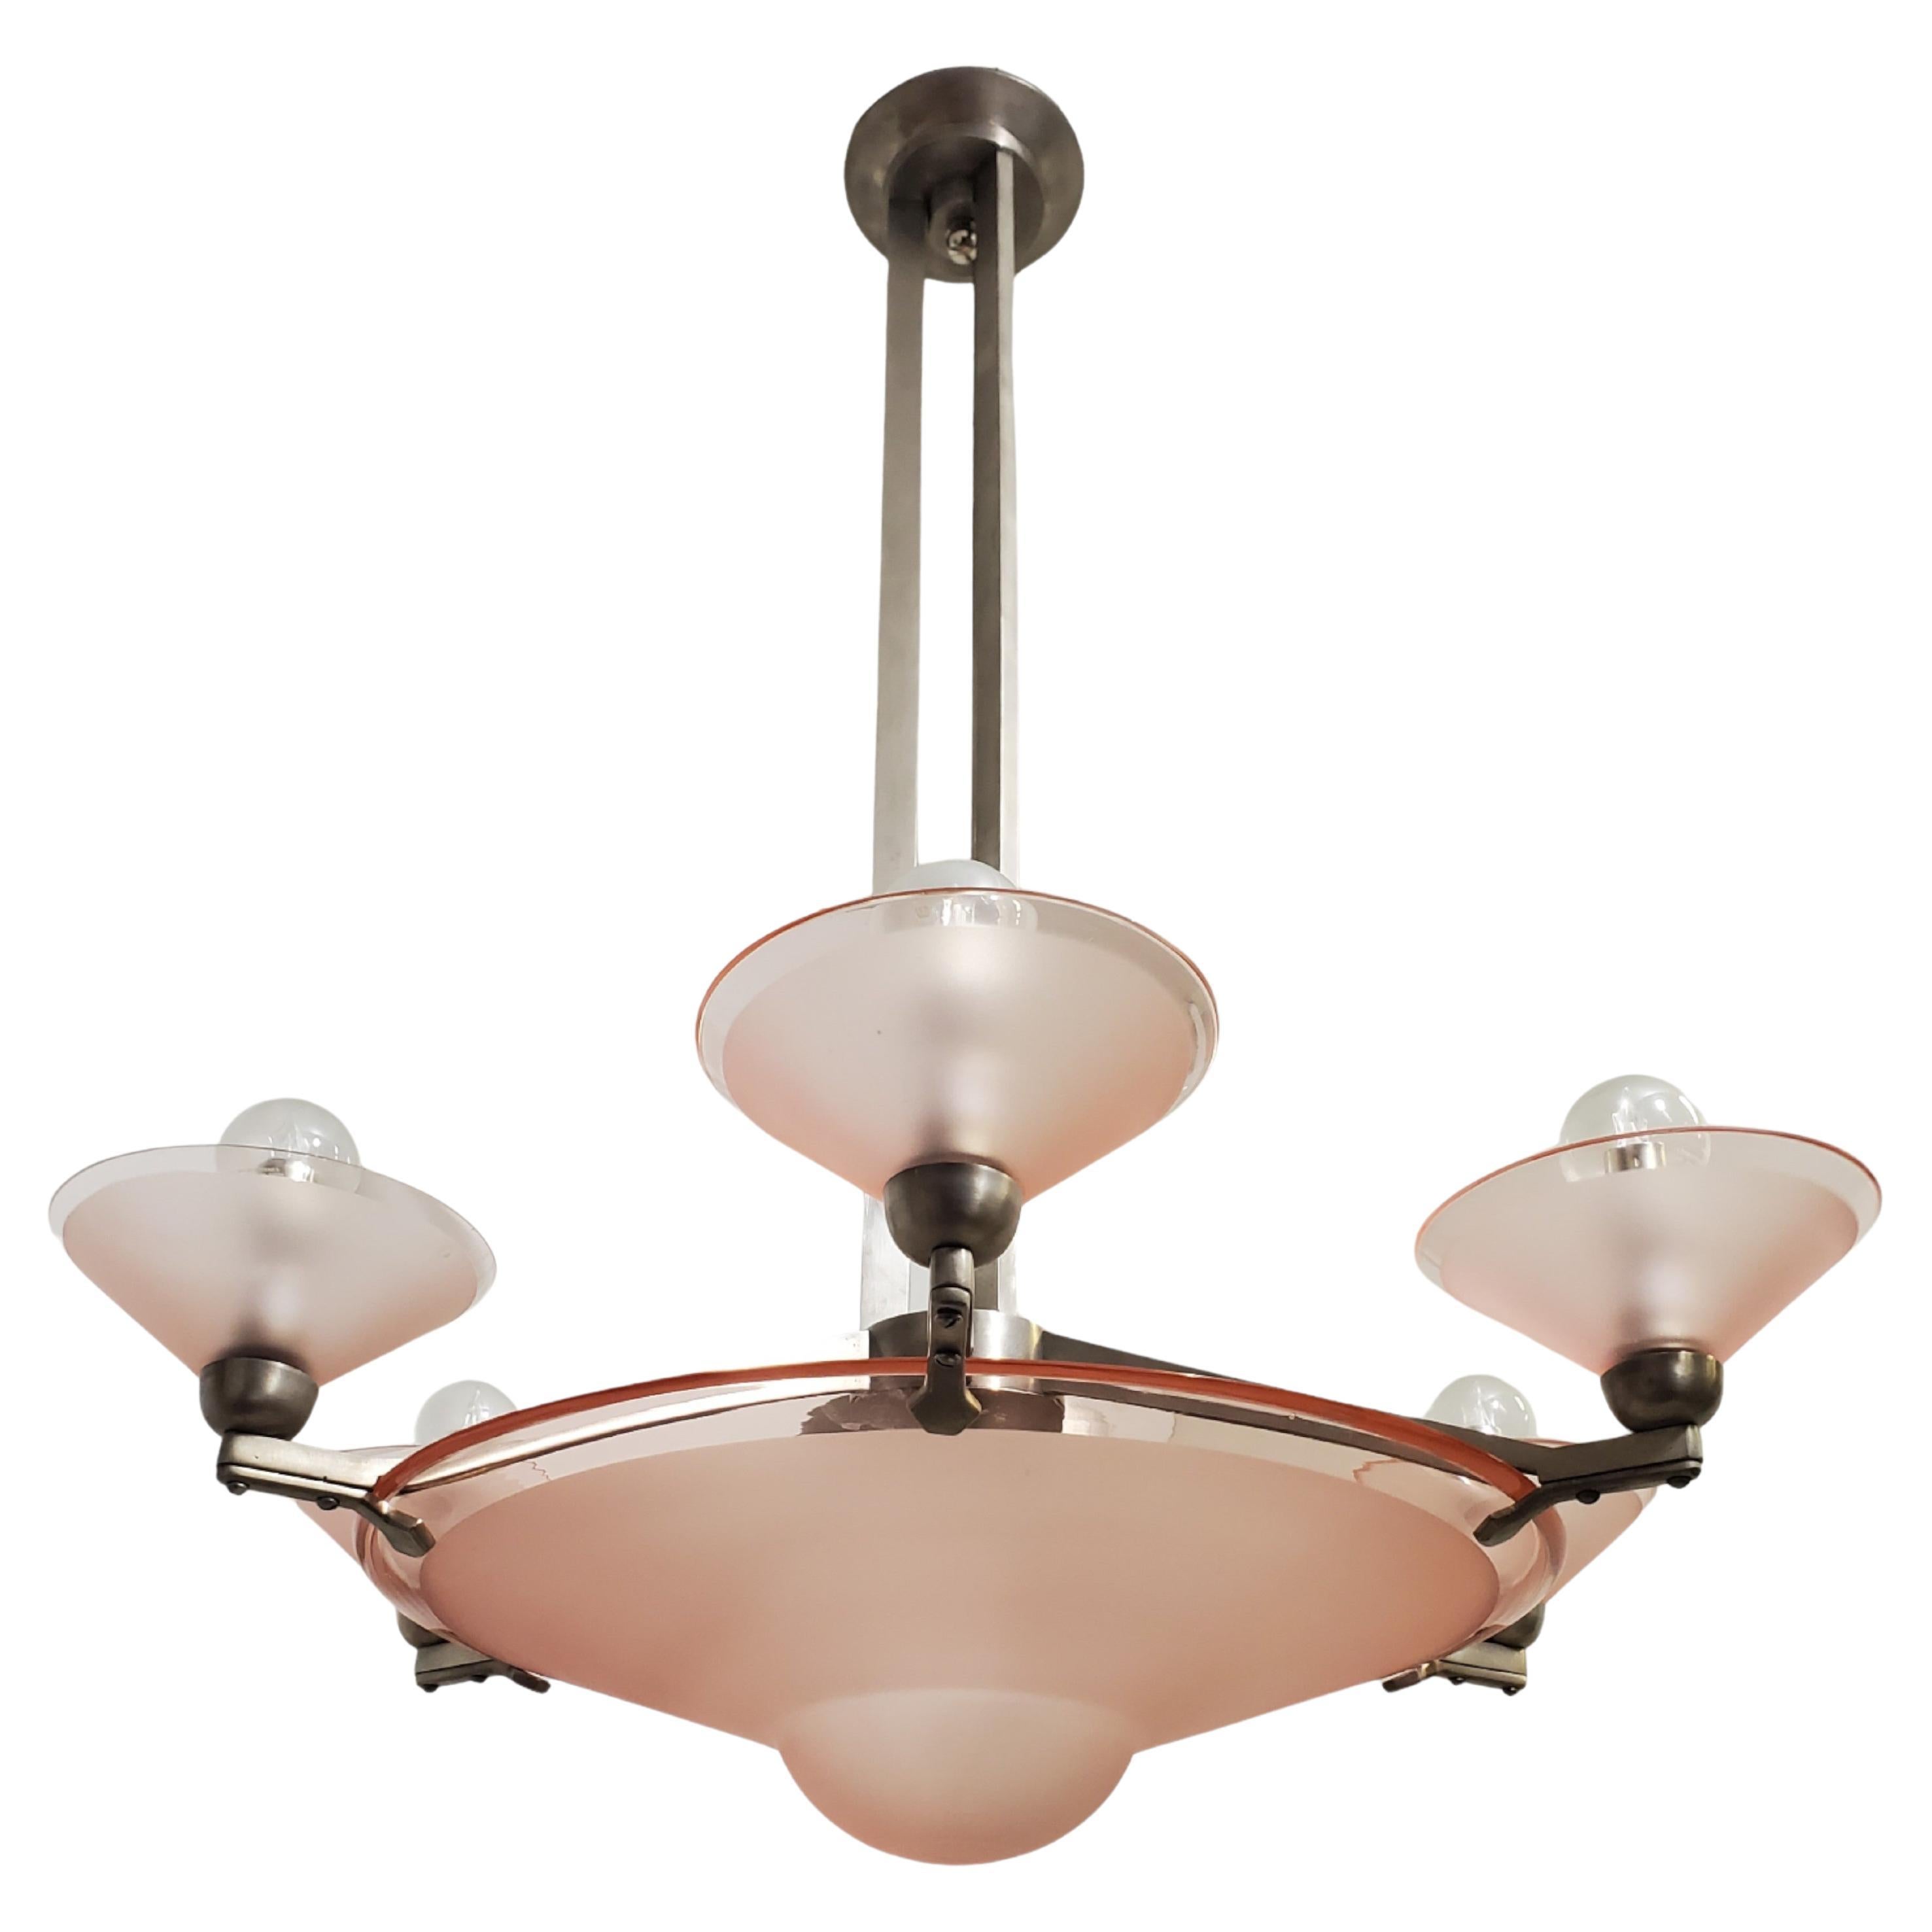 A pink frosted art glass chandelier showcasing a sizable, simple and sinuous central bowl-shaped coupe, complemented by six matching satellite dishes encircling the center. 
The chandelier is elegantly mounted on a nickeled bronze armature,